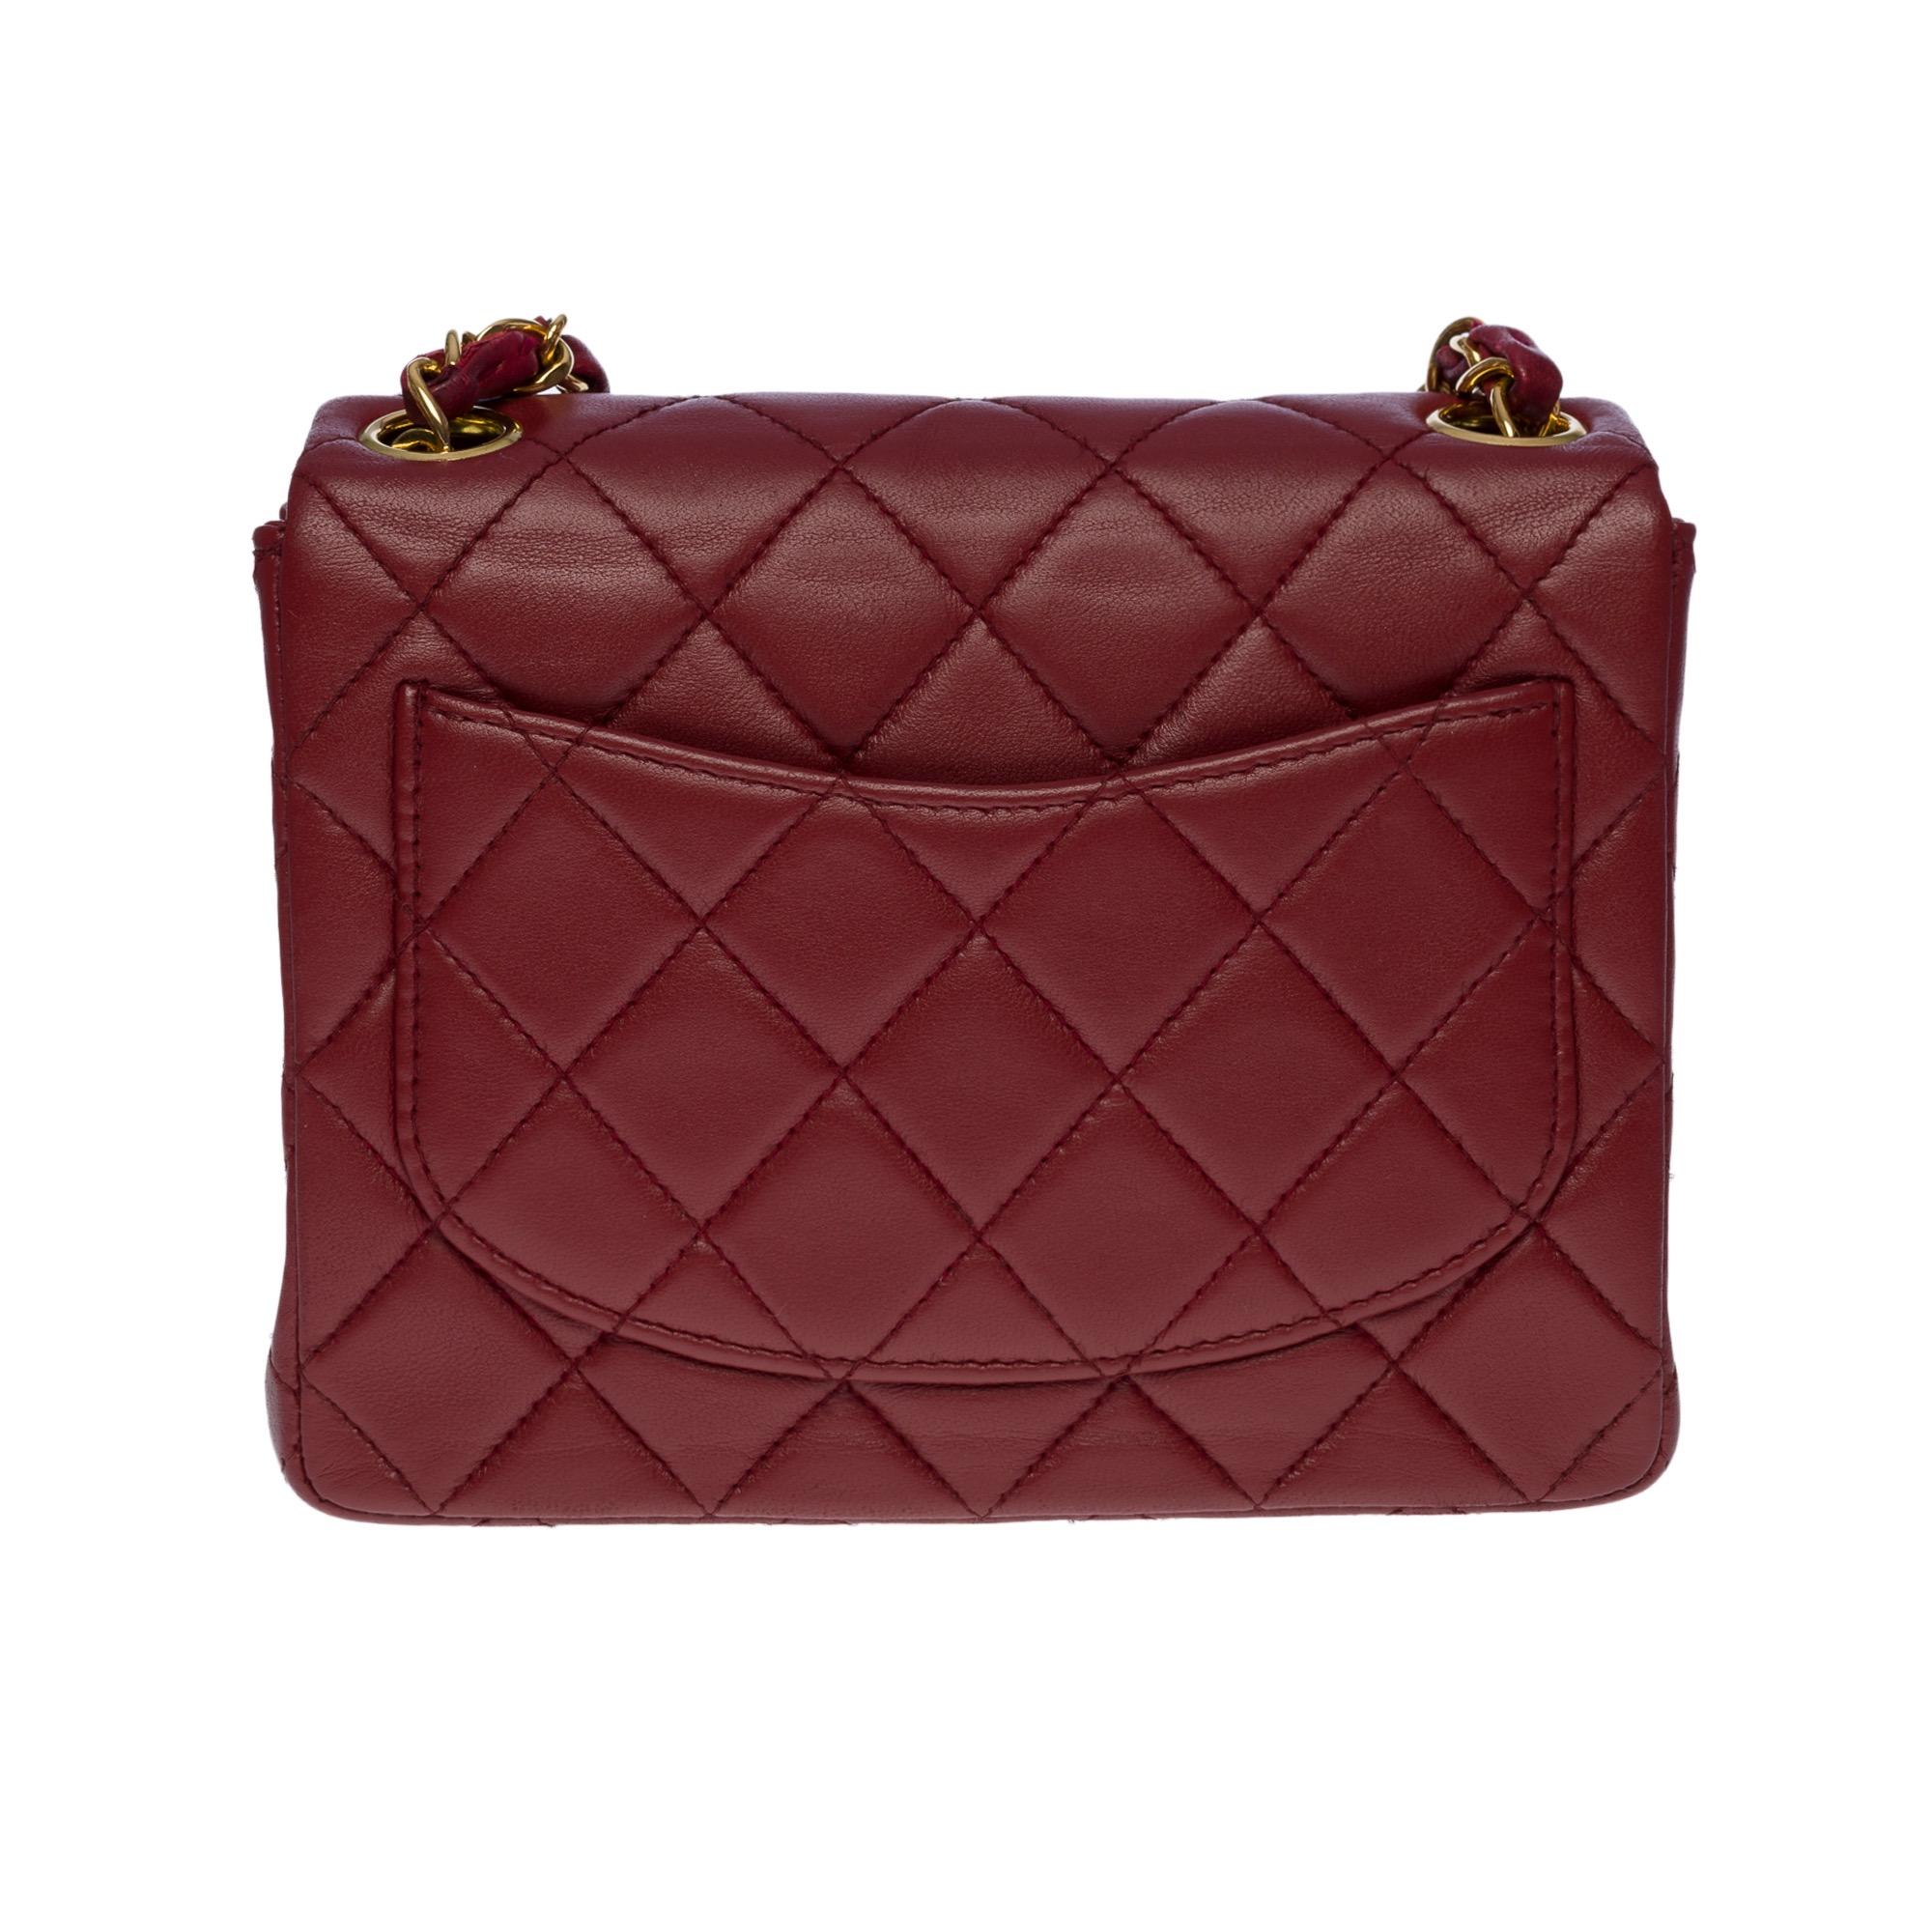 Splendid Chanel Timeless Mini flap bag in burgundy quilted leather, gold metal hardware, a gold metal chain handle interlaced with burgundy leather allowing a shoulder and shoulder strap
Patch pocket on the back of the bag
Flap closure, golden CC